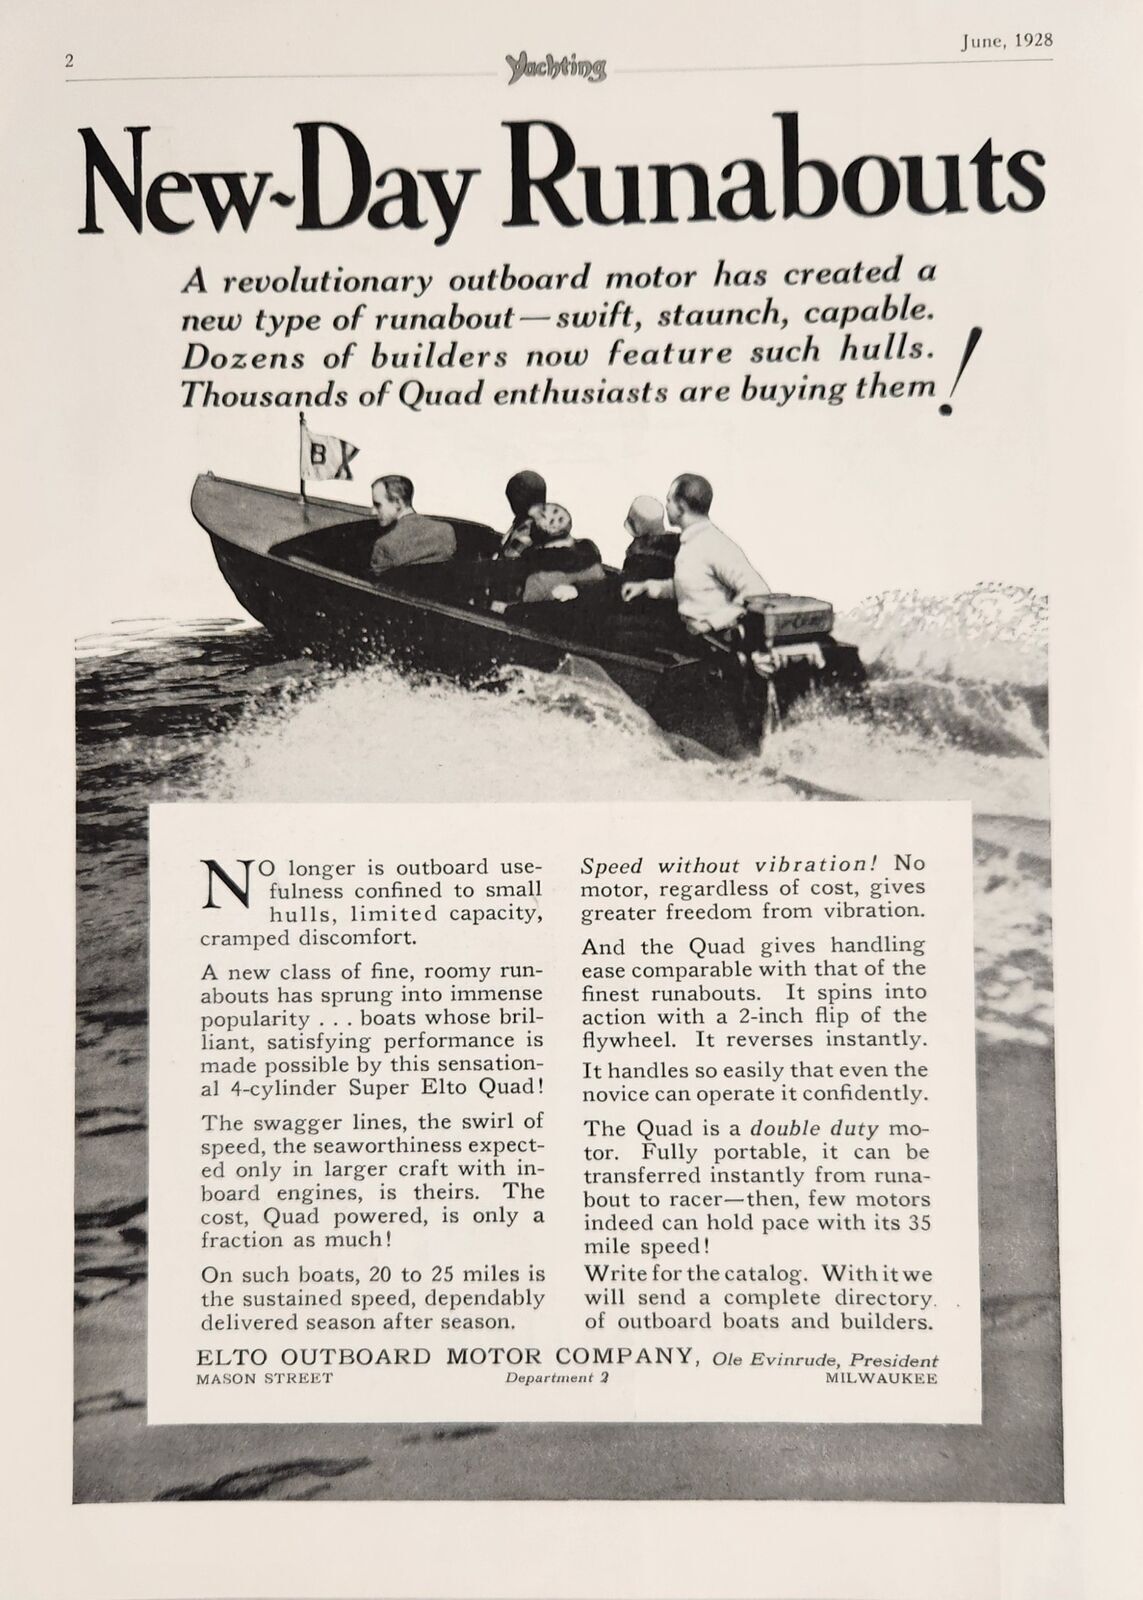 1928 Print Ad Super Elto Quad Outboard Motors for Runabout Boats Milwaukee,WI